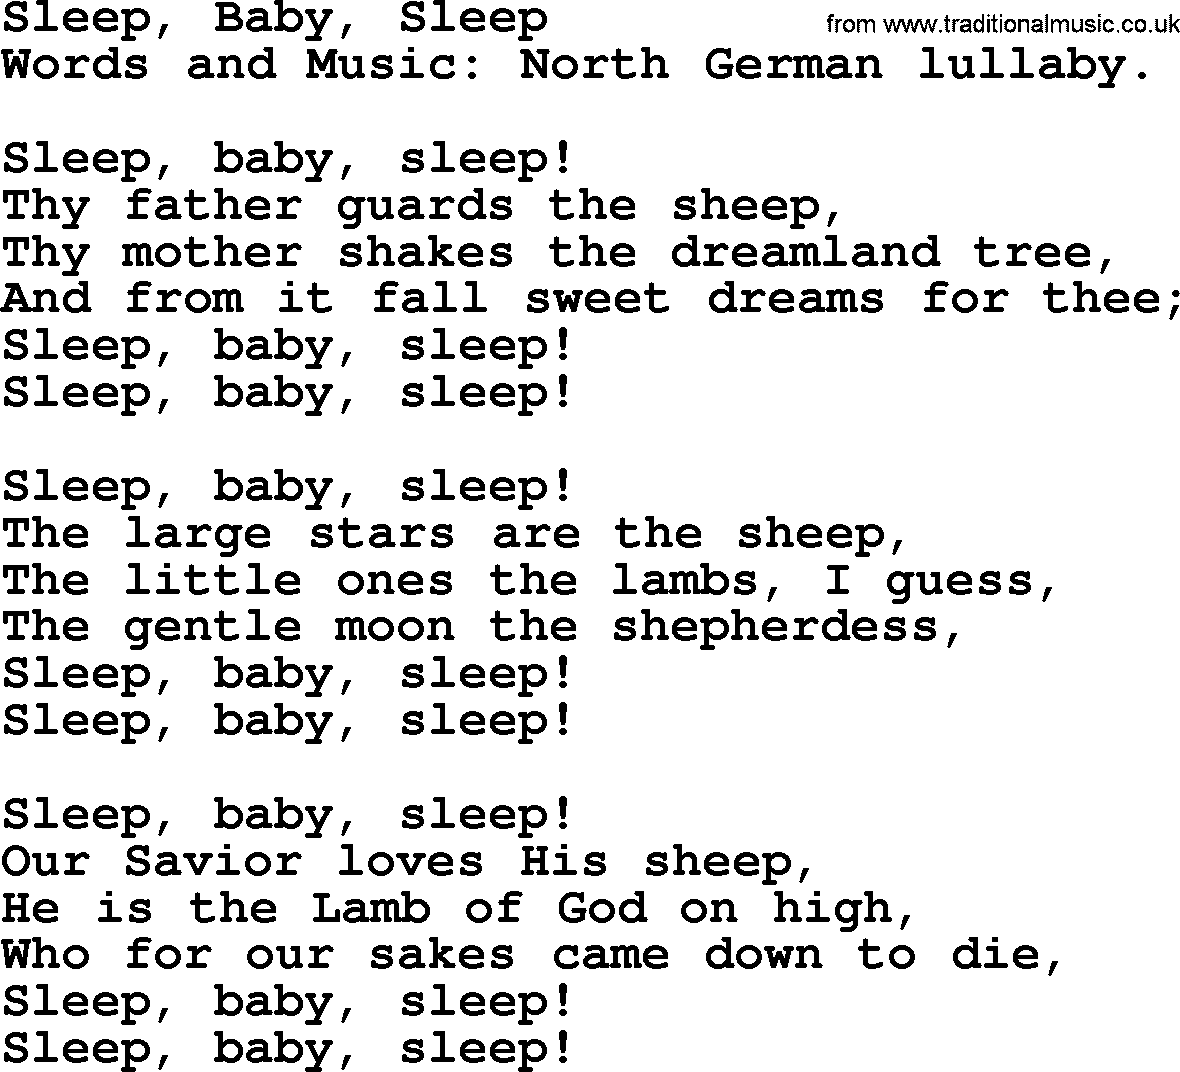 280 Christmas Hymns and songs with PowerPoints and PDF, title: Sleep, Baby, Sleep, lyrics, PPT and PDF